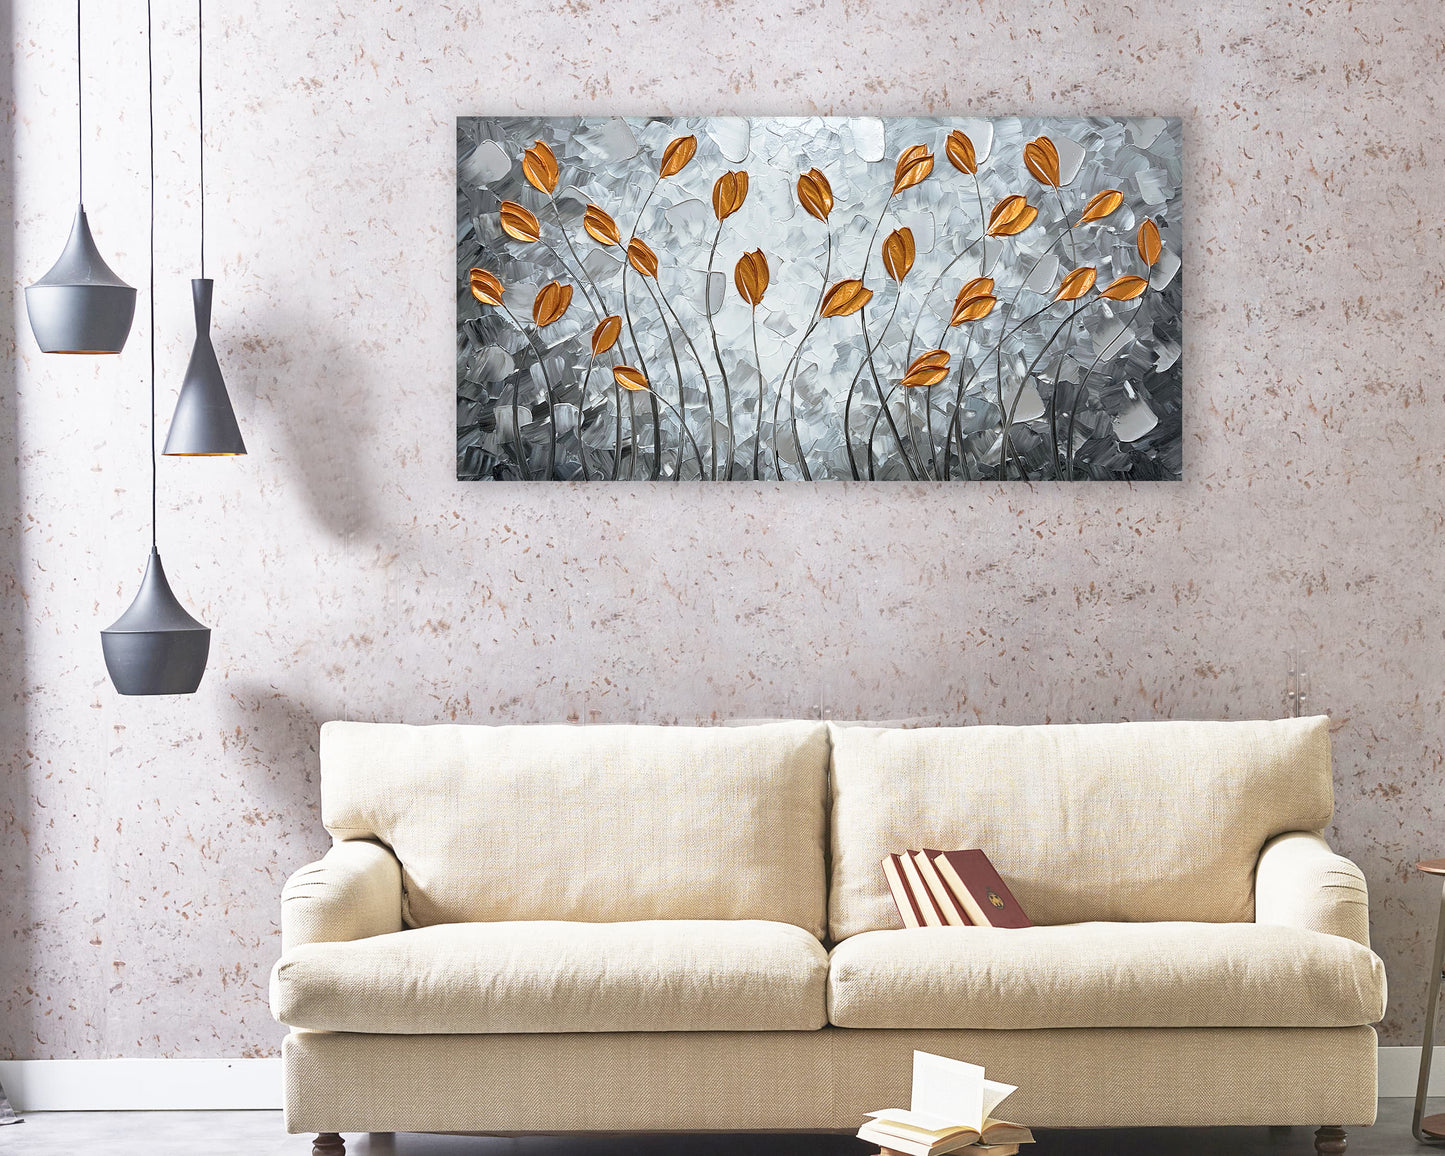 Abstract Art "Fall's Echo" Hand-painted on Wrapped Canvas for Home Decor